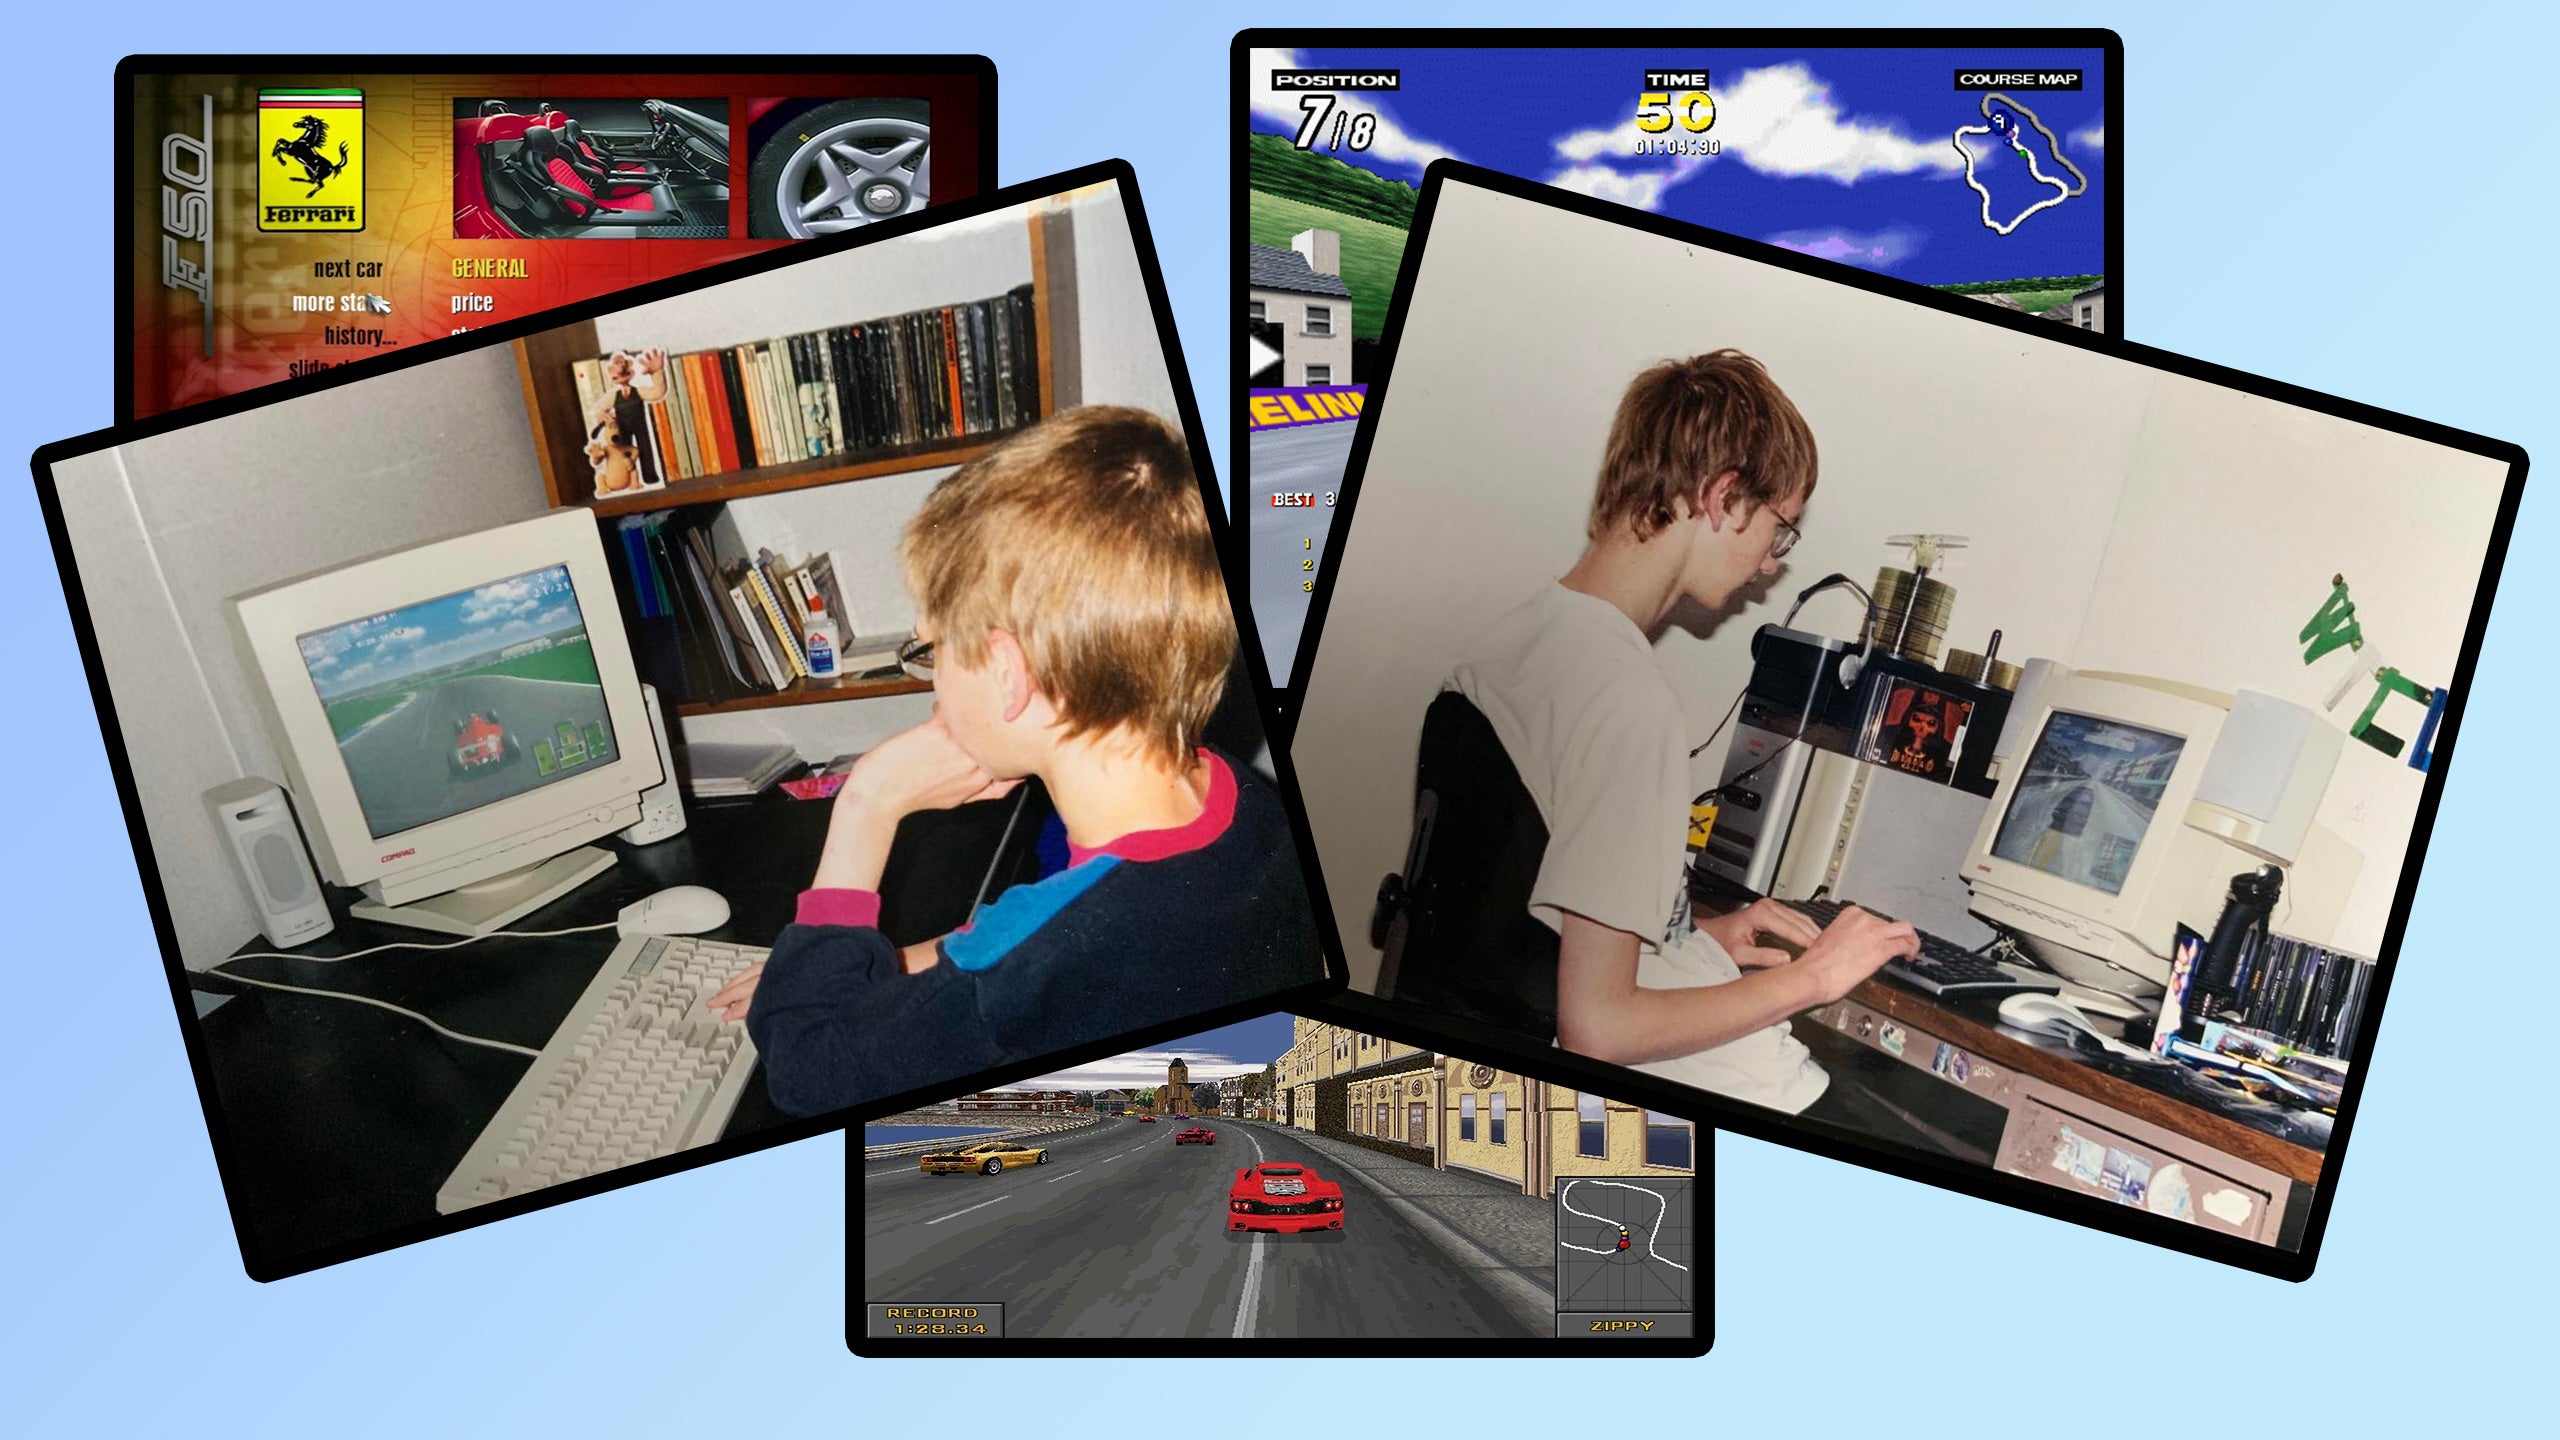 a depiction of photographs of will judd as a child and old racing game screenshots, arranged in a messy stack